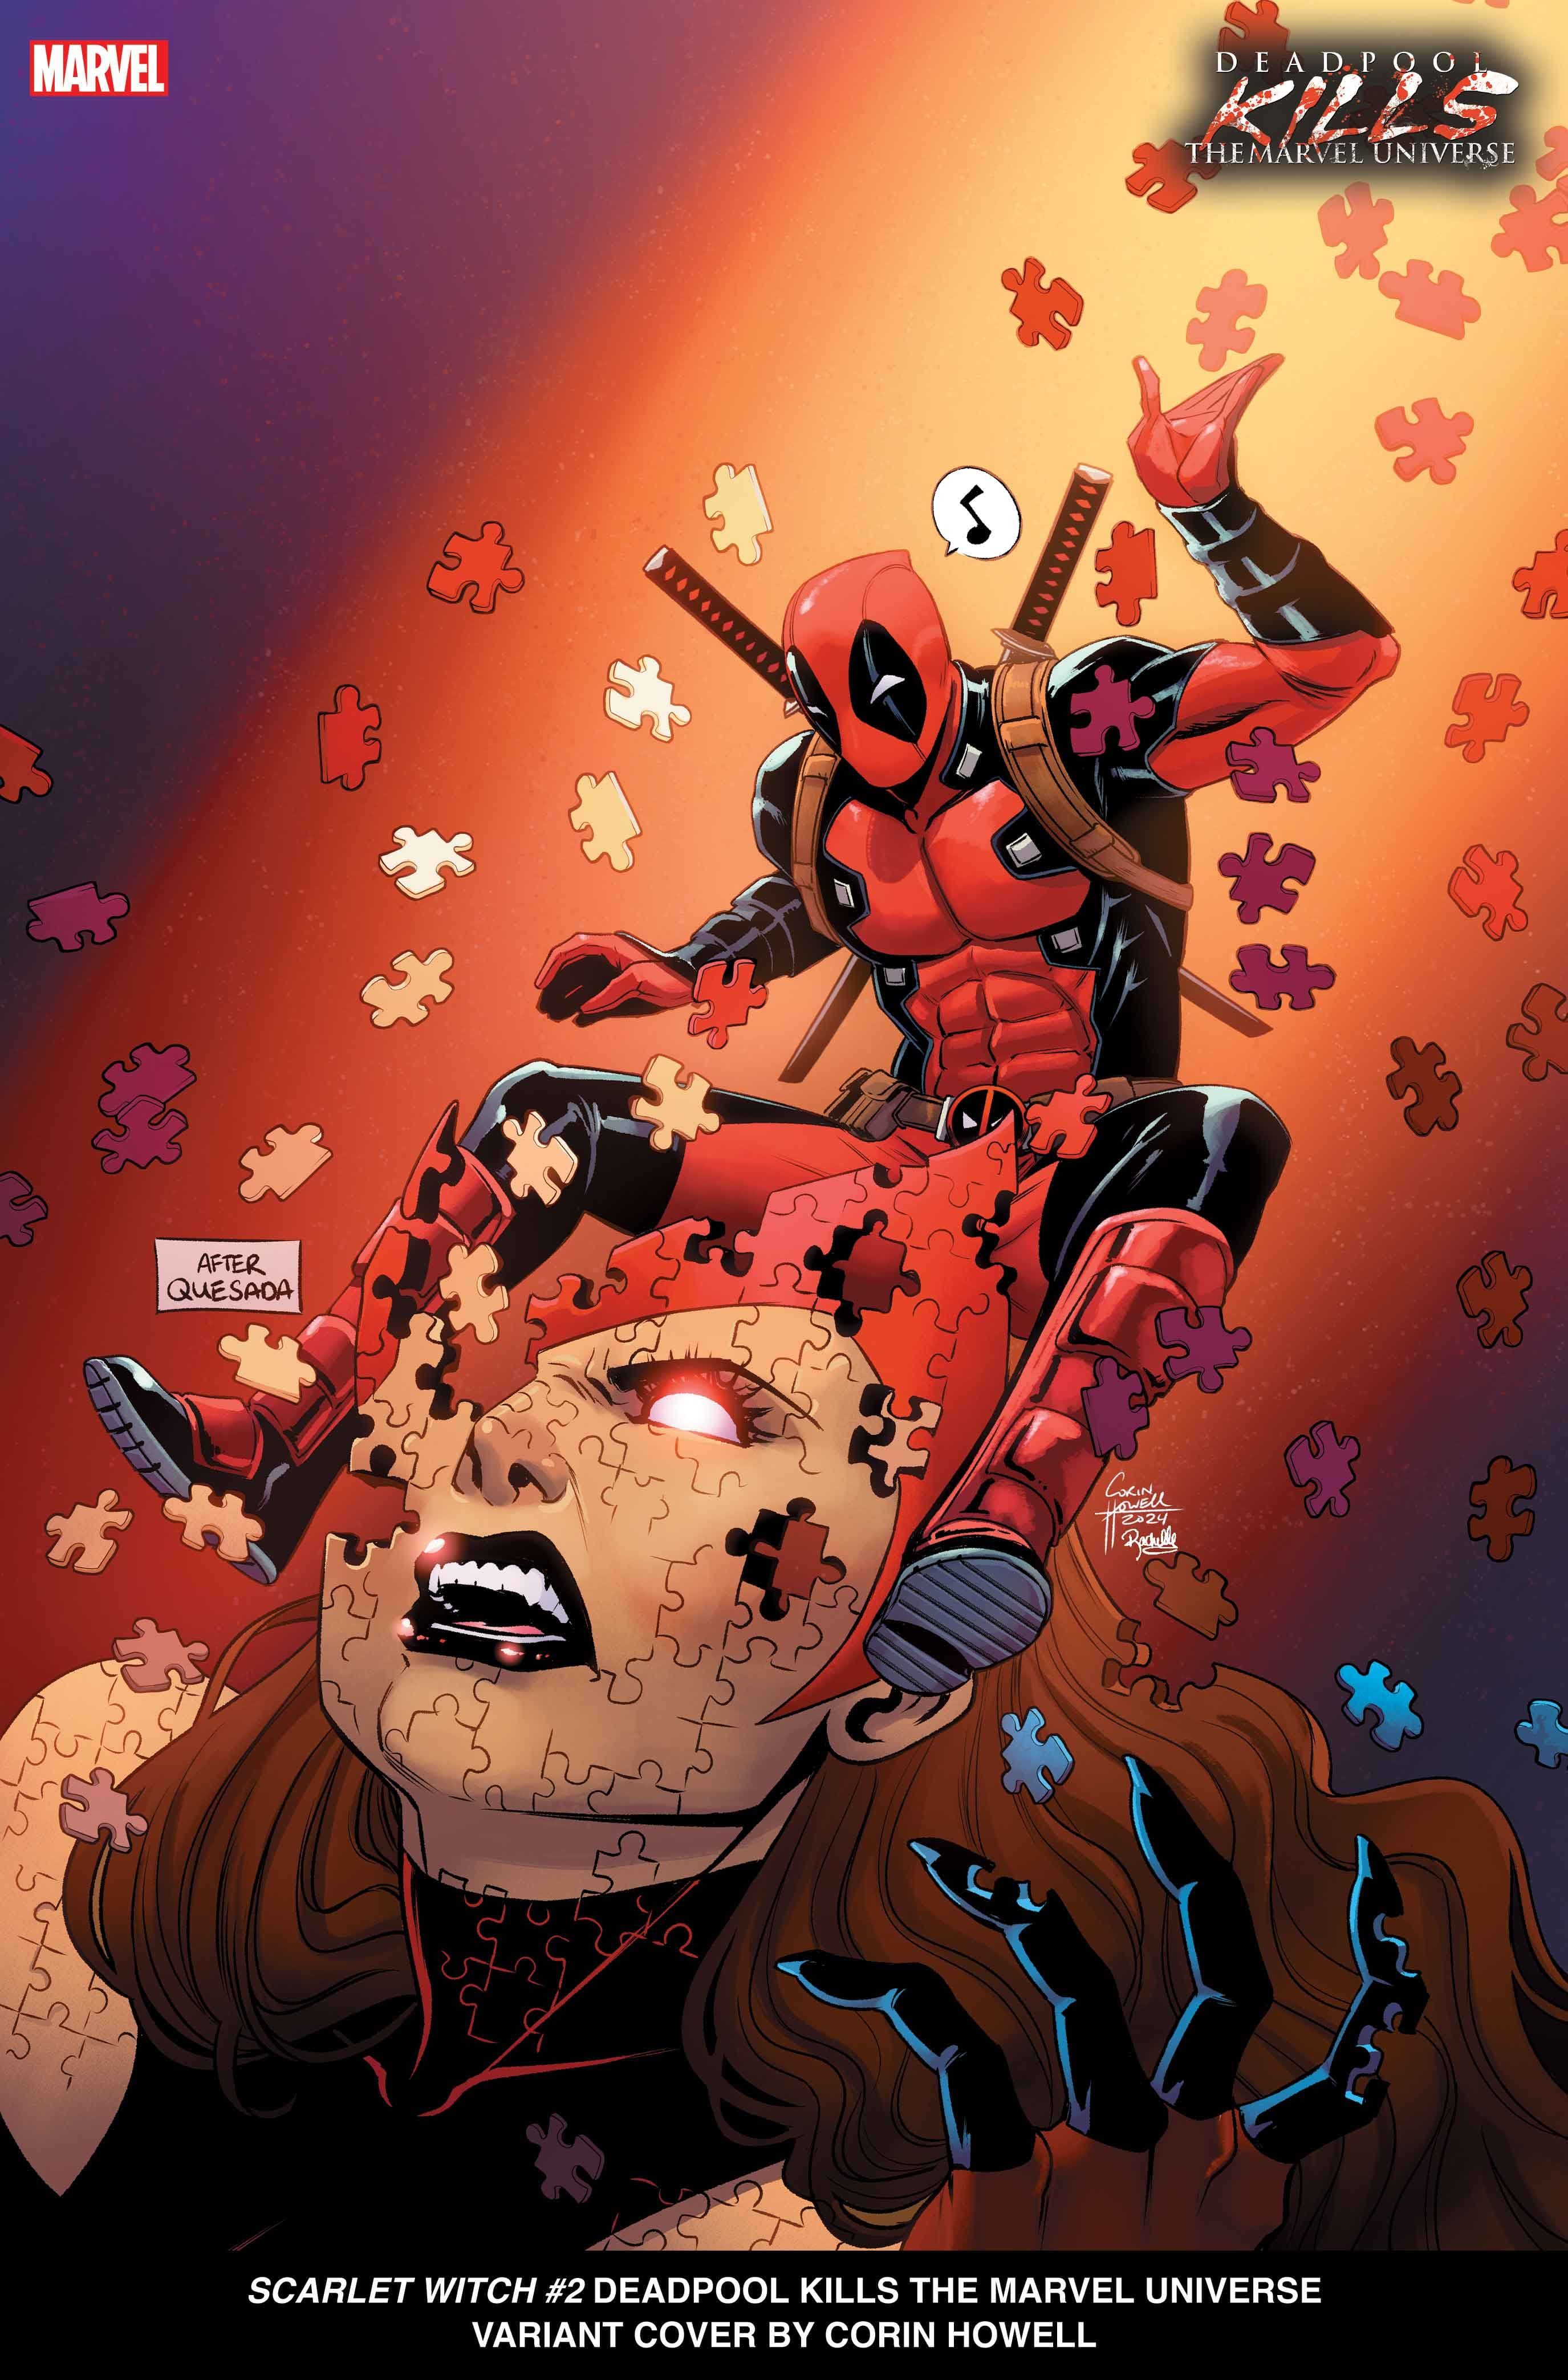 SCARLET WITCH #2 Deadpool Kills the Marvel Universe Variant Cover by Corin Howell